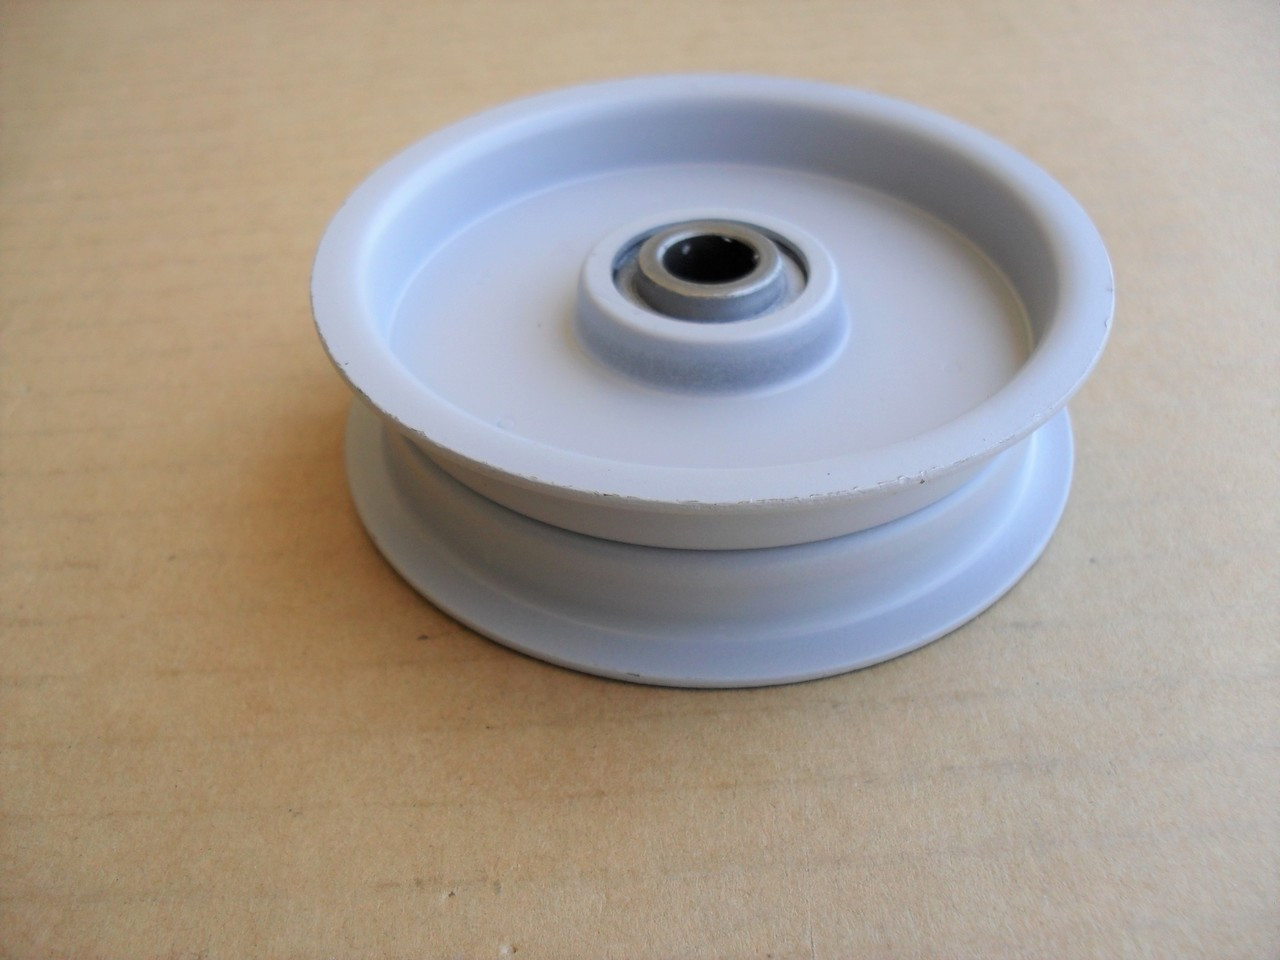 Idler Pulley for Lawn Boy 706364 Lawnboy, Made In USA Height: 7/8" ID: 3/8" OD: 3-1/8"